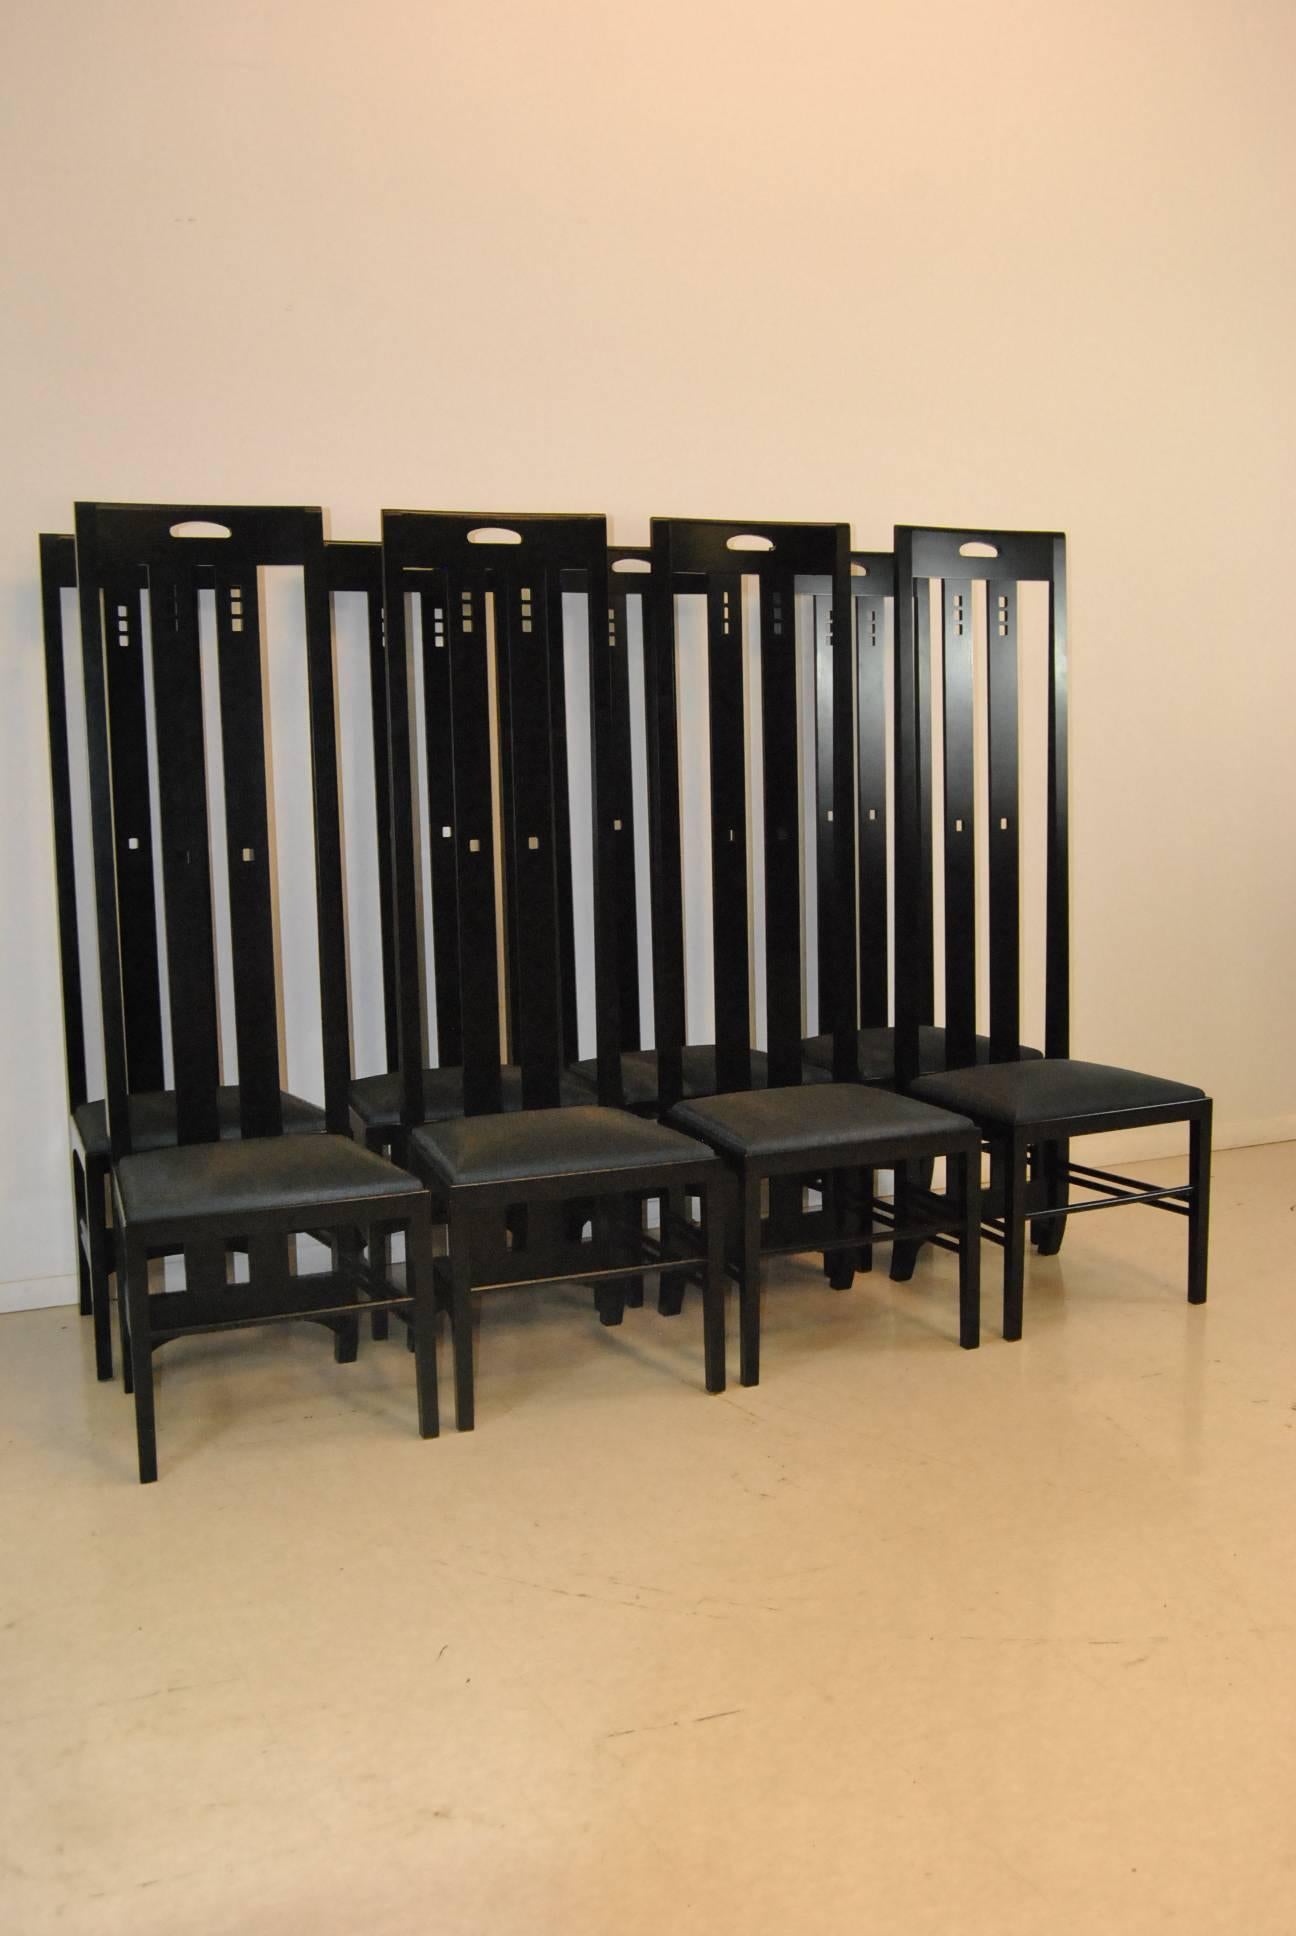 This black lacquered high back chair was designed by Charles Rennie Mackintosh and produced posthumously sometime, circa 1970. The chair was produced by Cassina in solid ash with ebony finish. The chairs name is taken from the Ingram tea rooms in